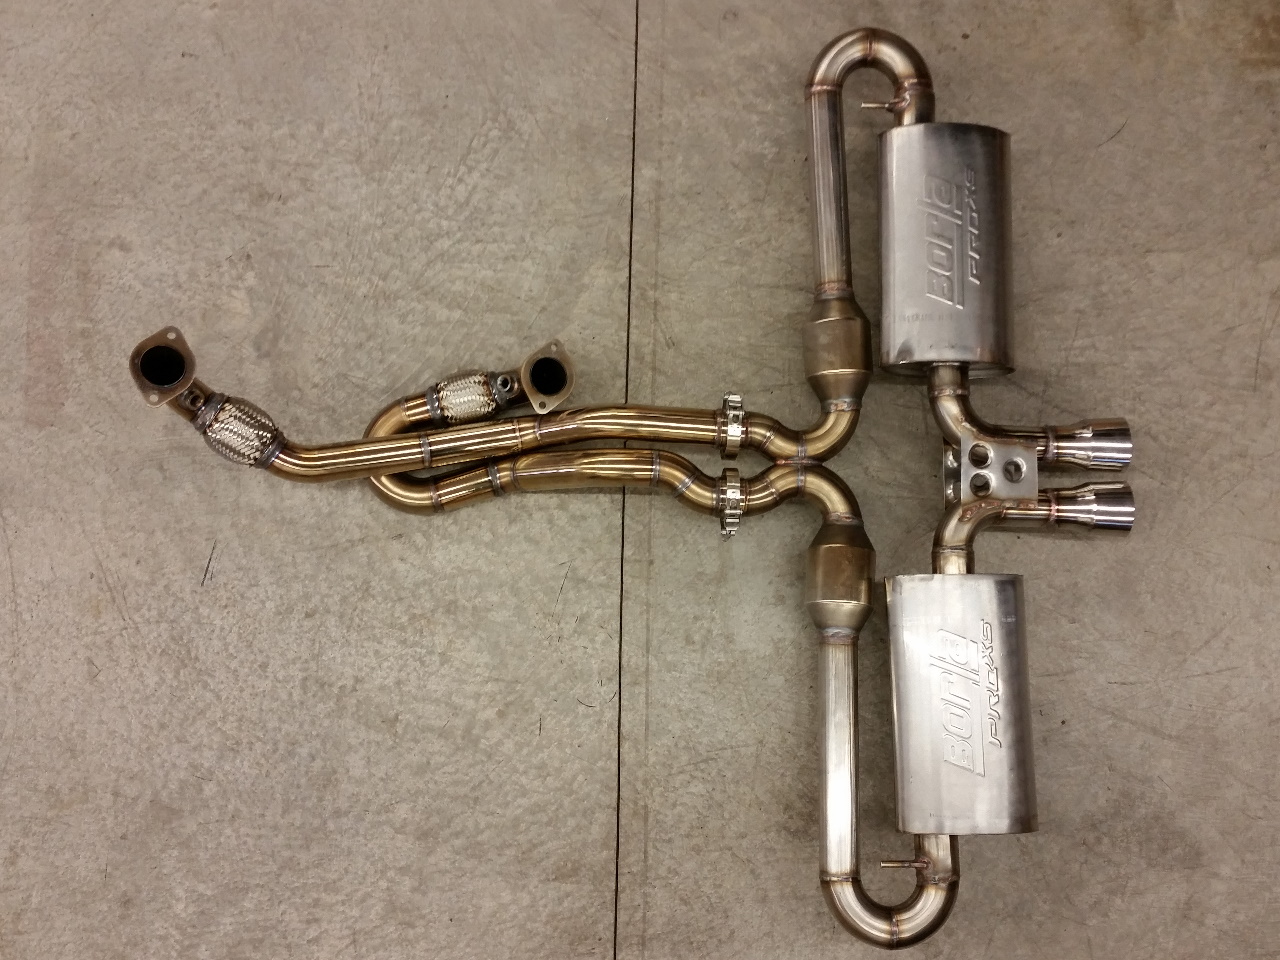 Custom dual exhaust with x-pipe for 2GR swapped MR2.